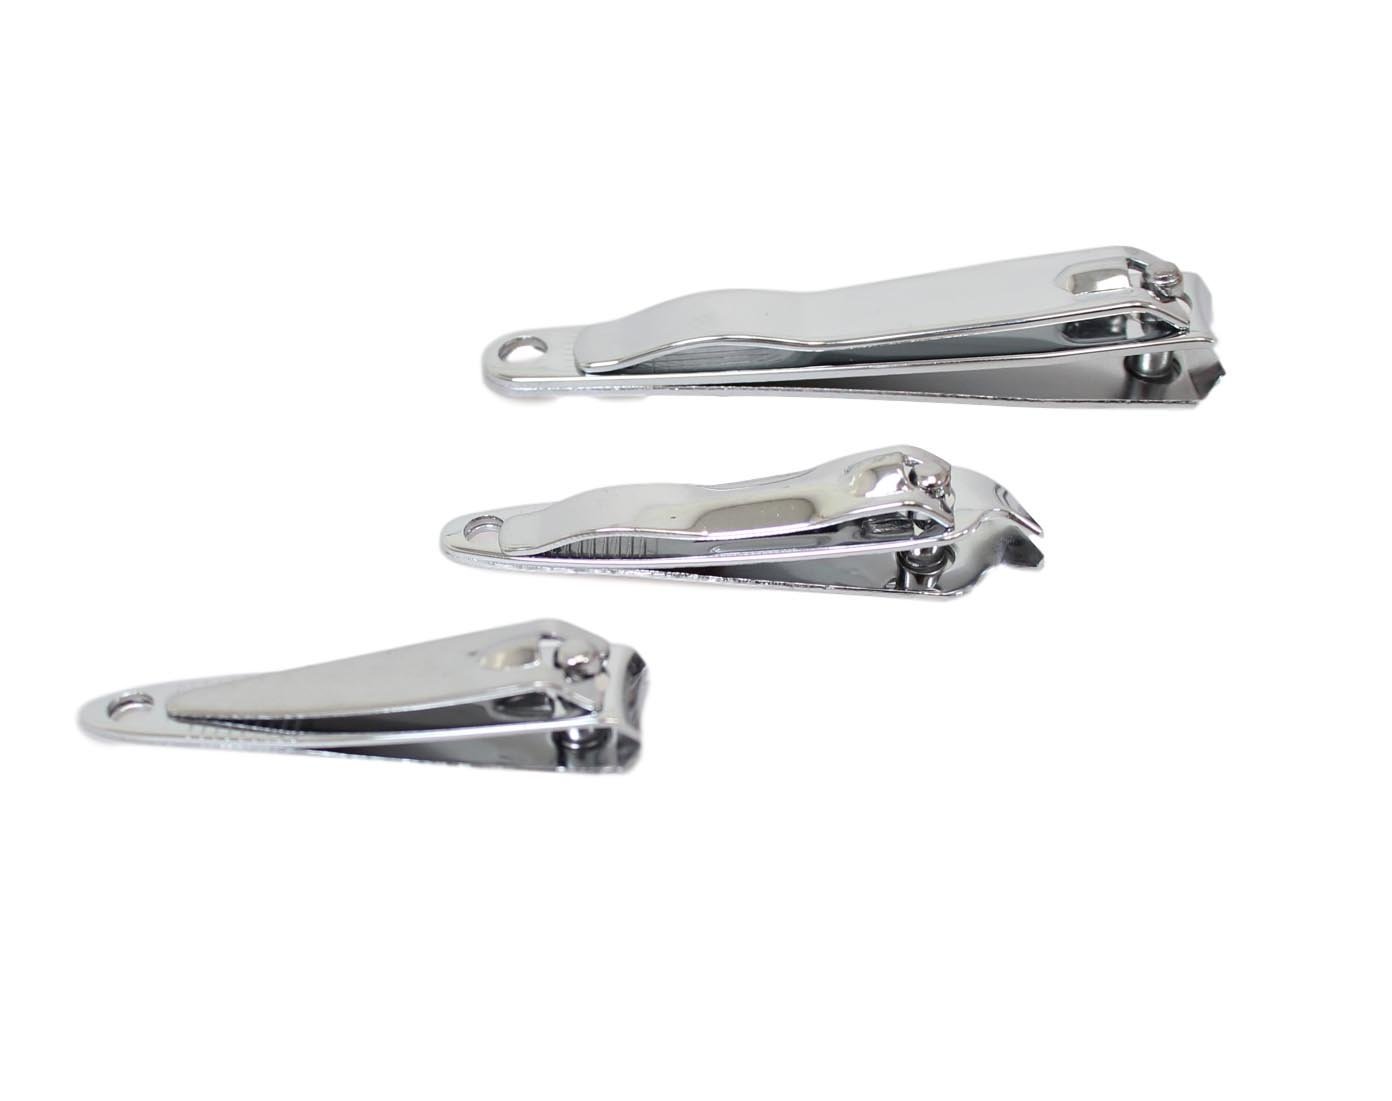 Manicure Nail Clipper Cutter Set of 3 Assorted Nail Cutters 6010 (Large Letter Rate)